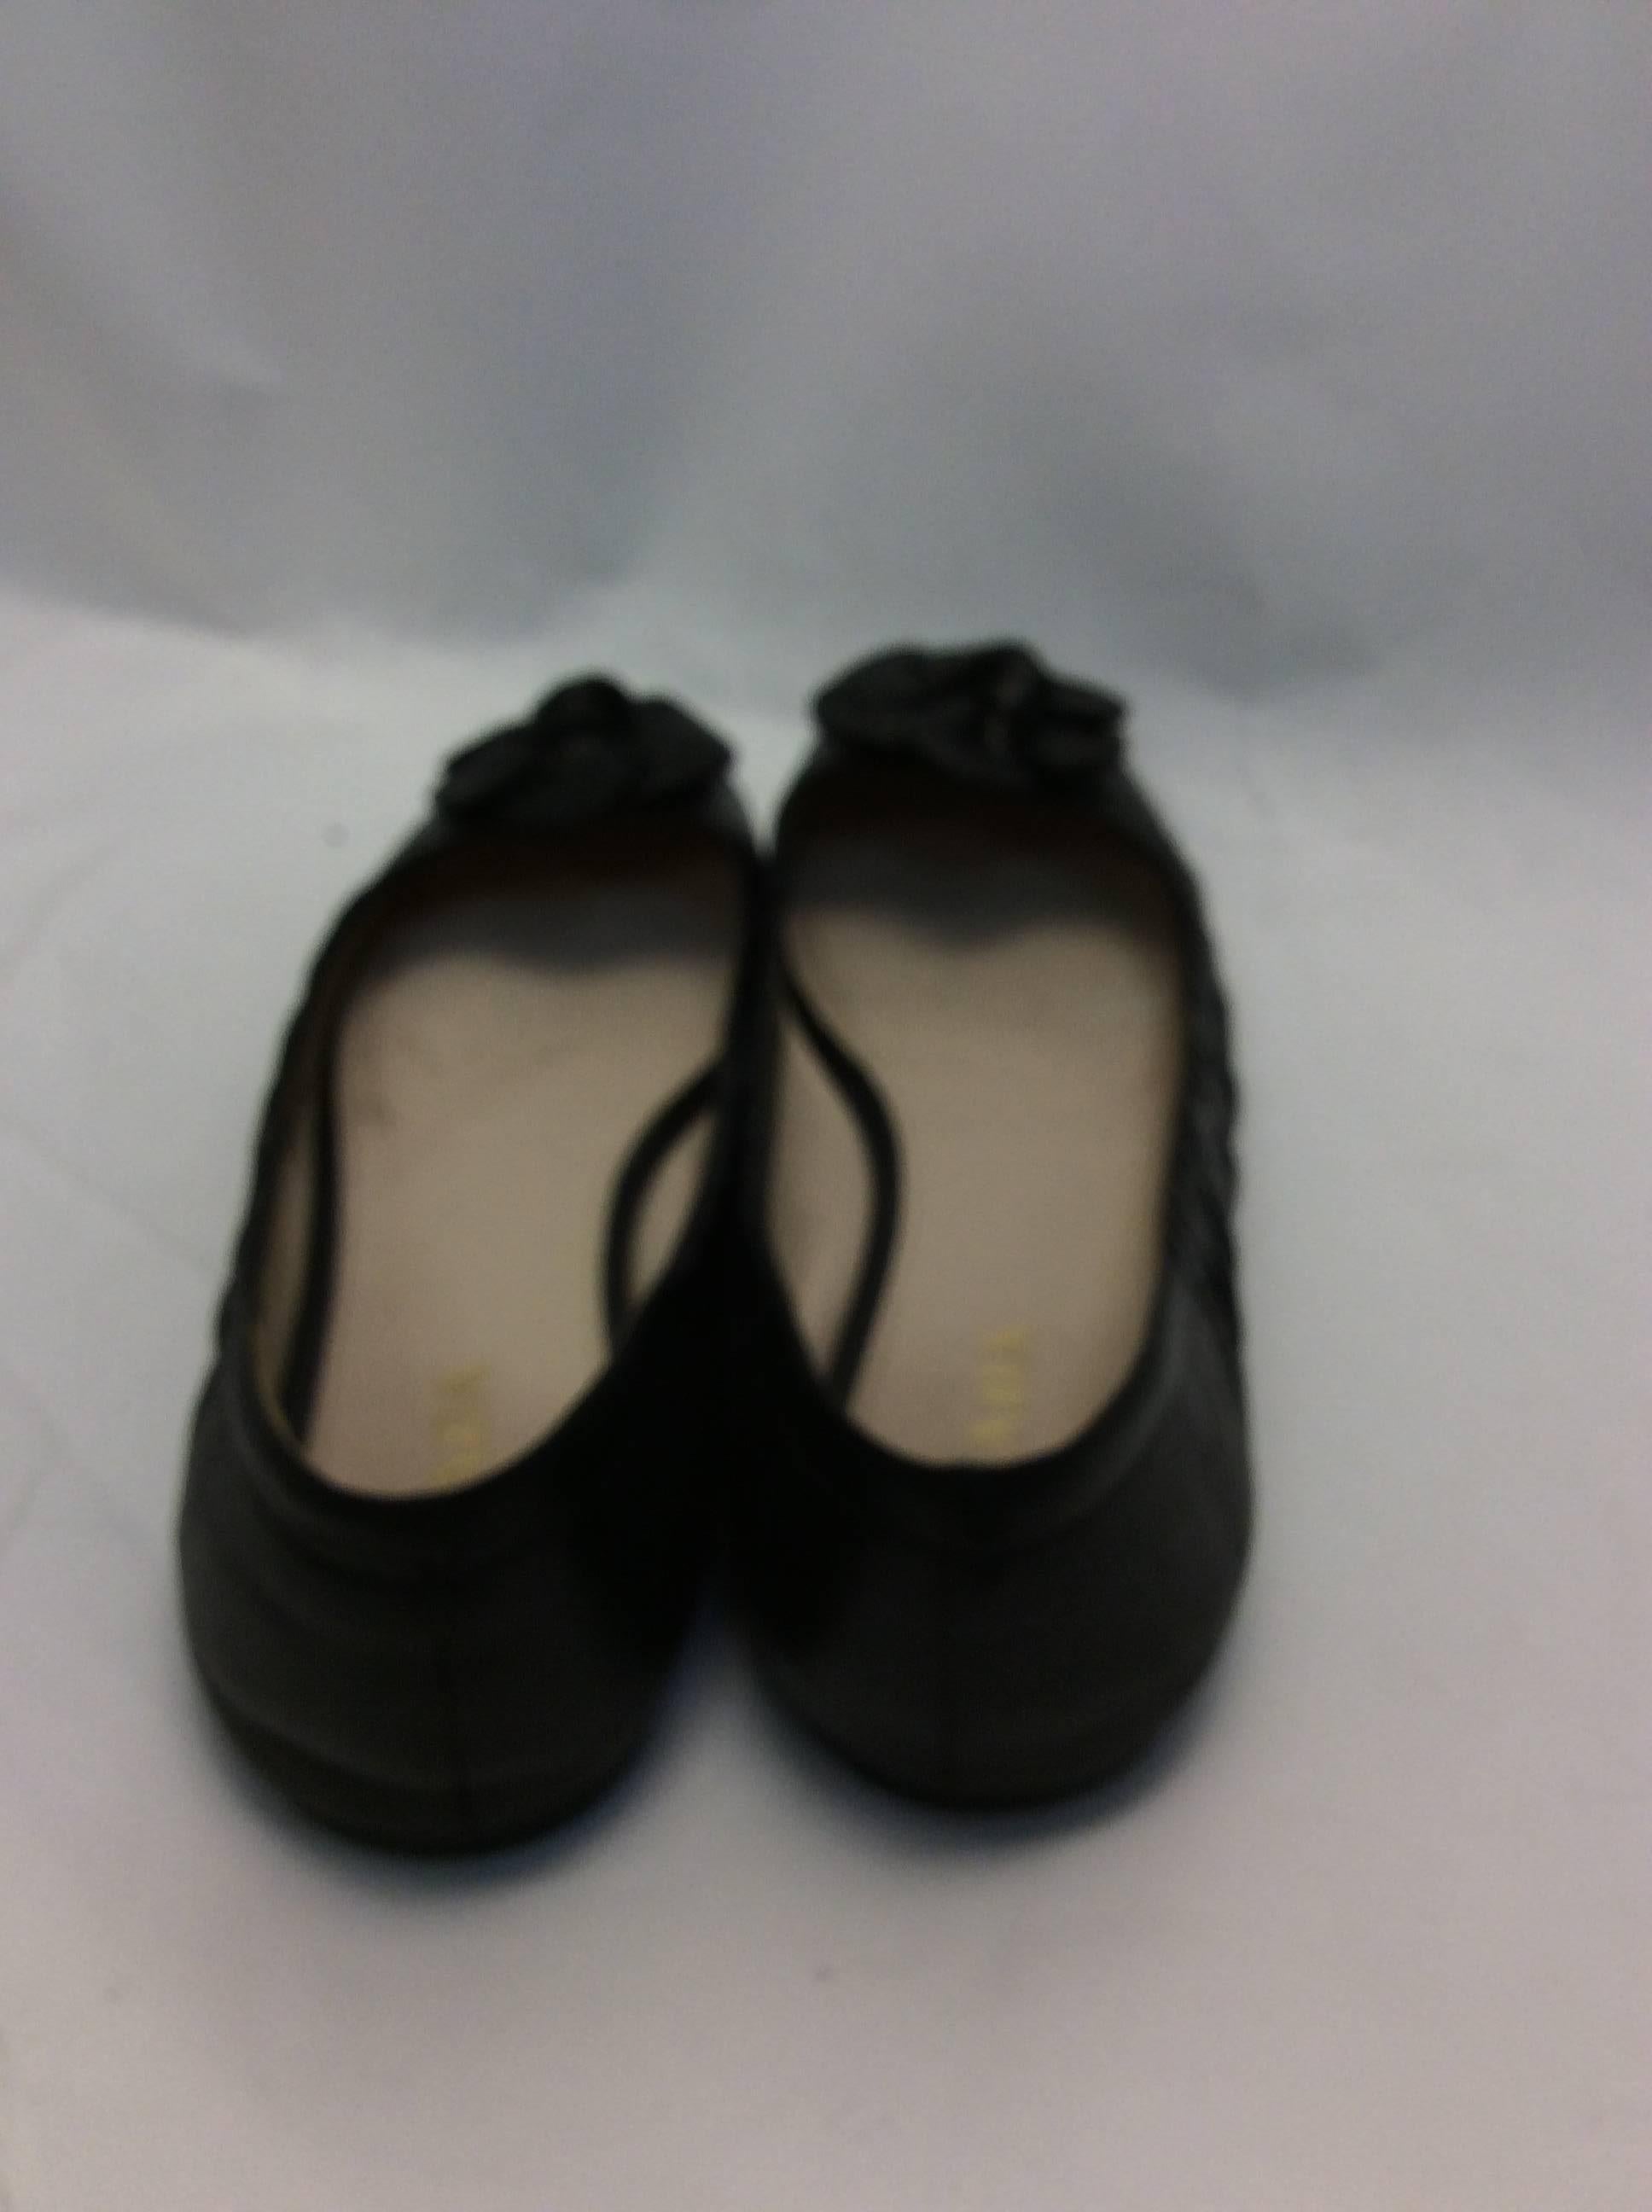 Prada Black Leather Flats In Excellent Condition For Sale In Narberth, PA